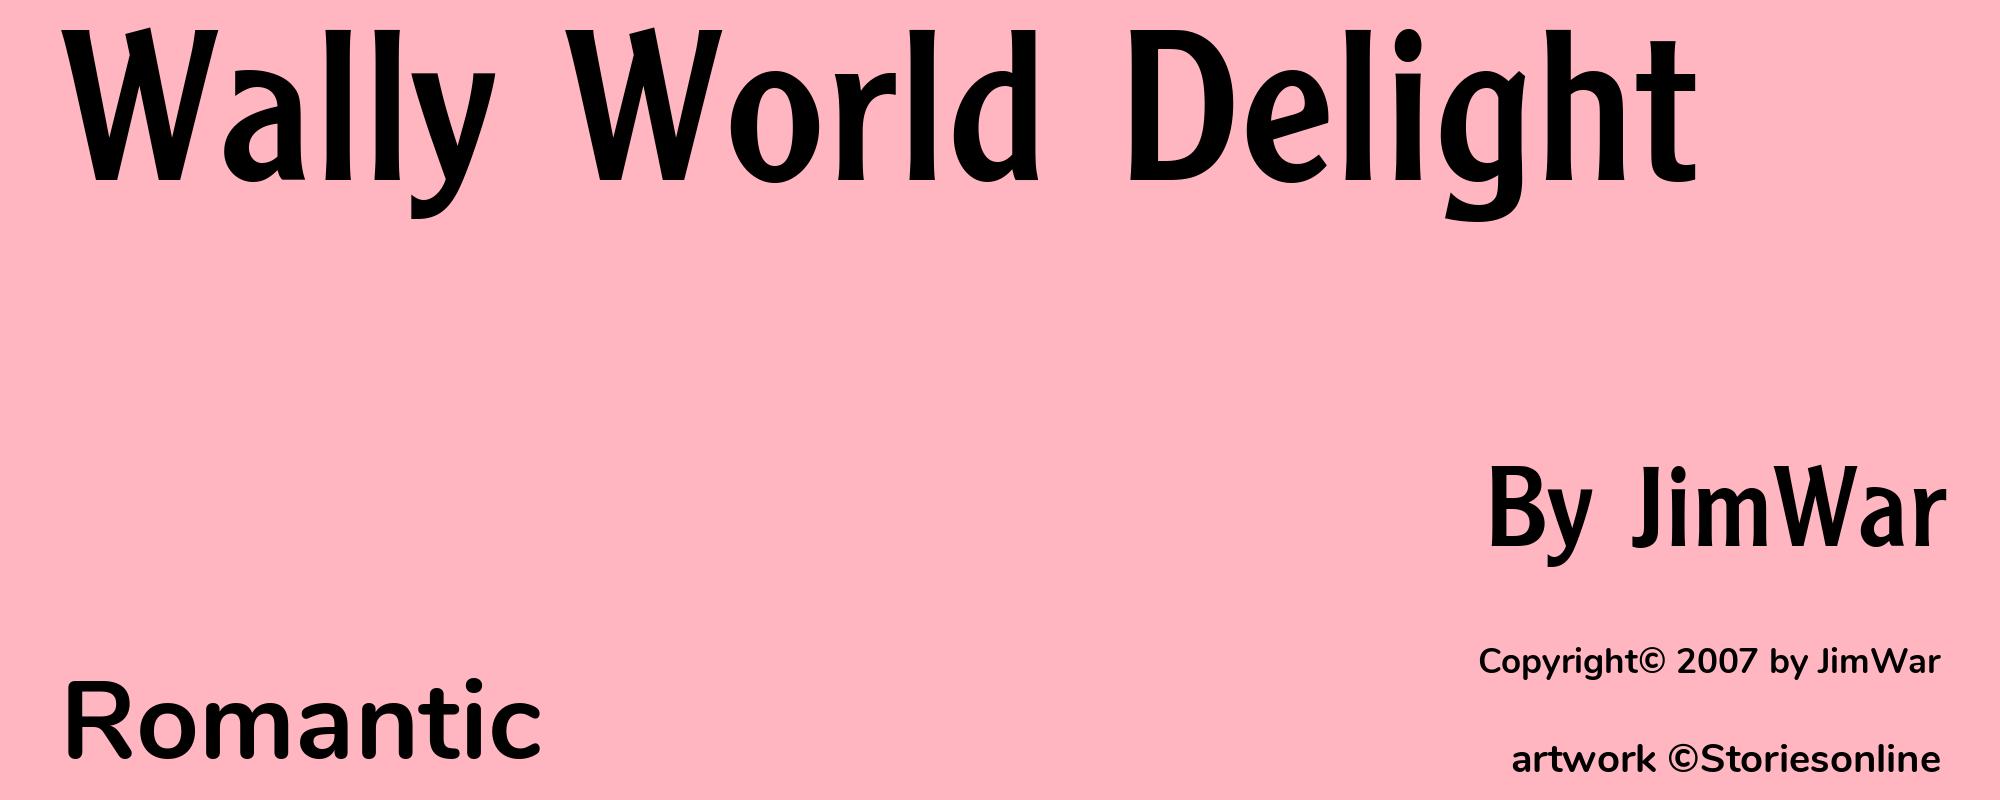 Wally World Delight - Cover